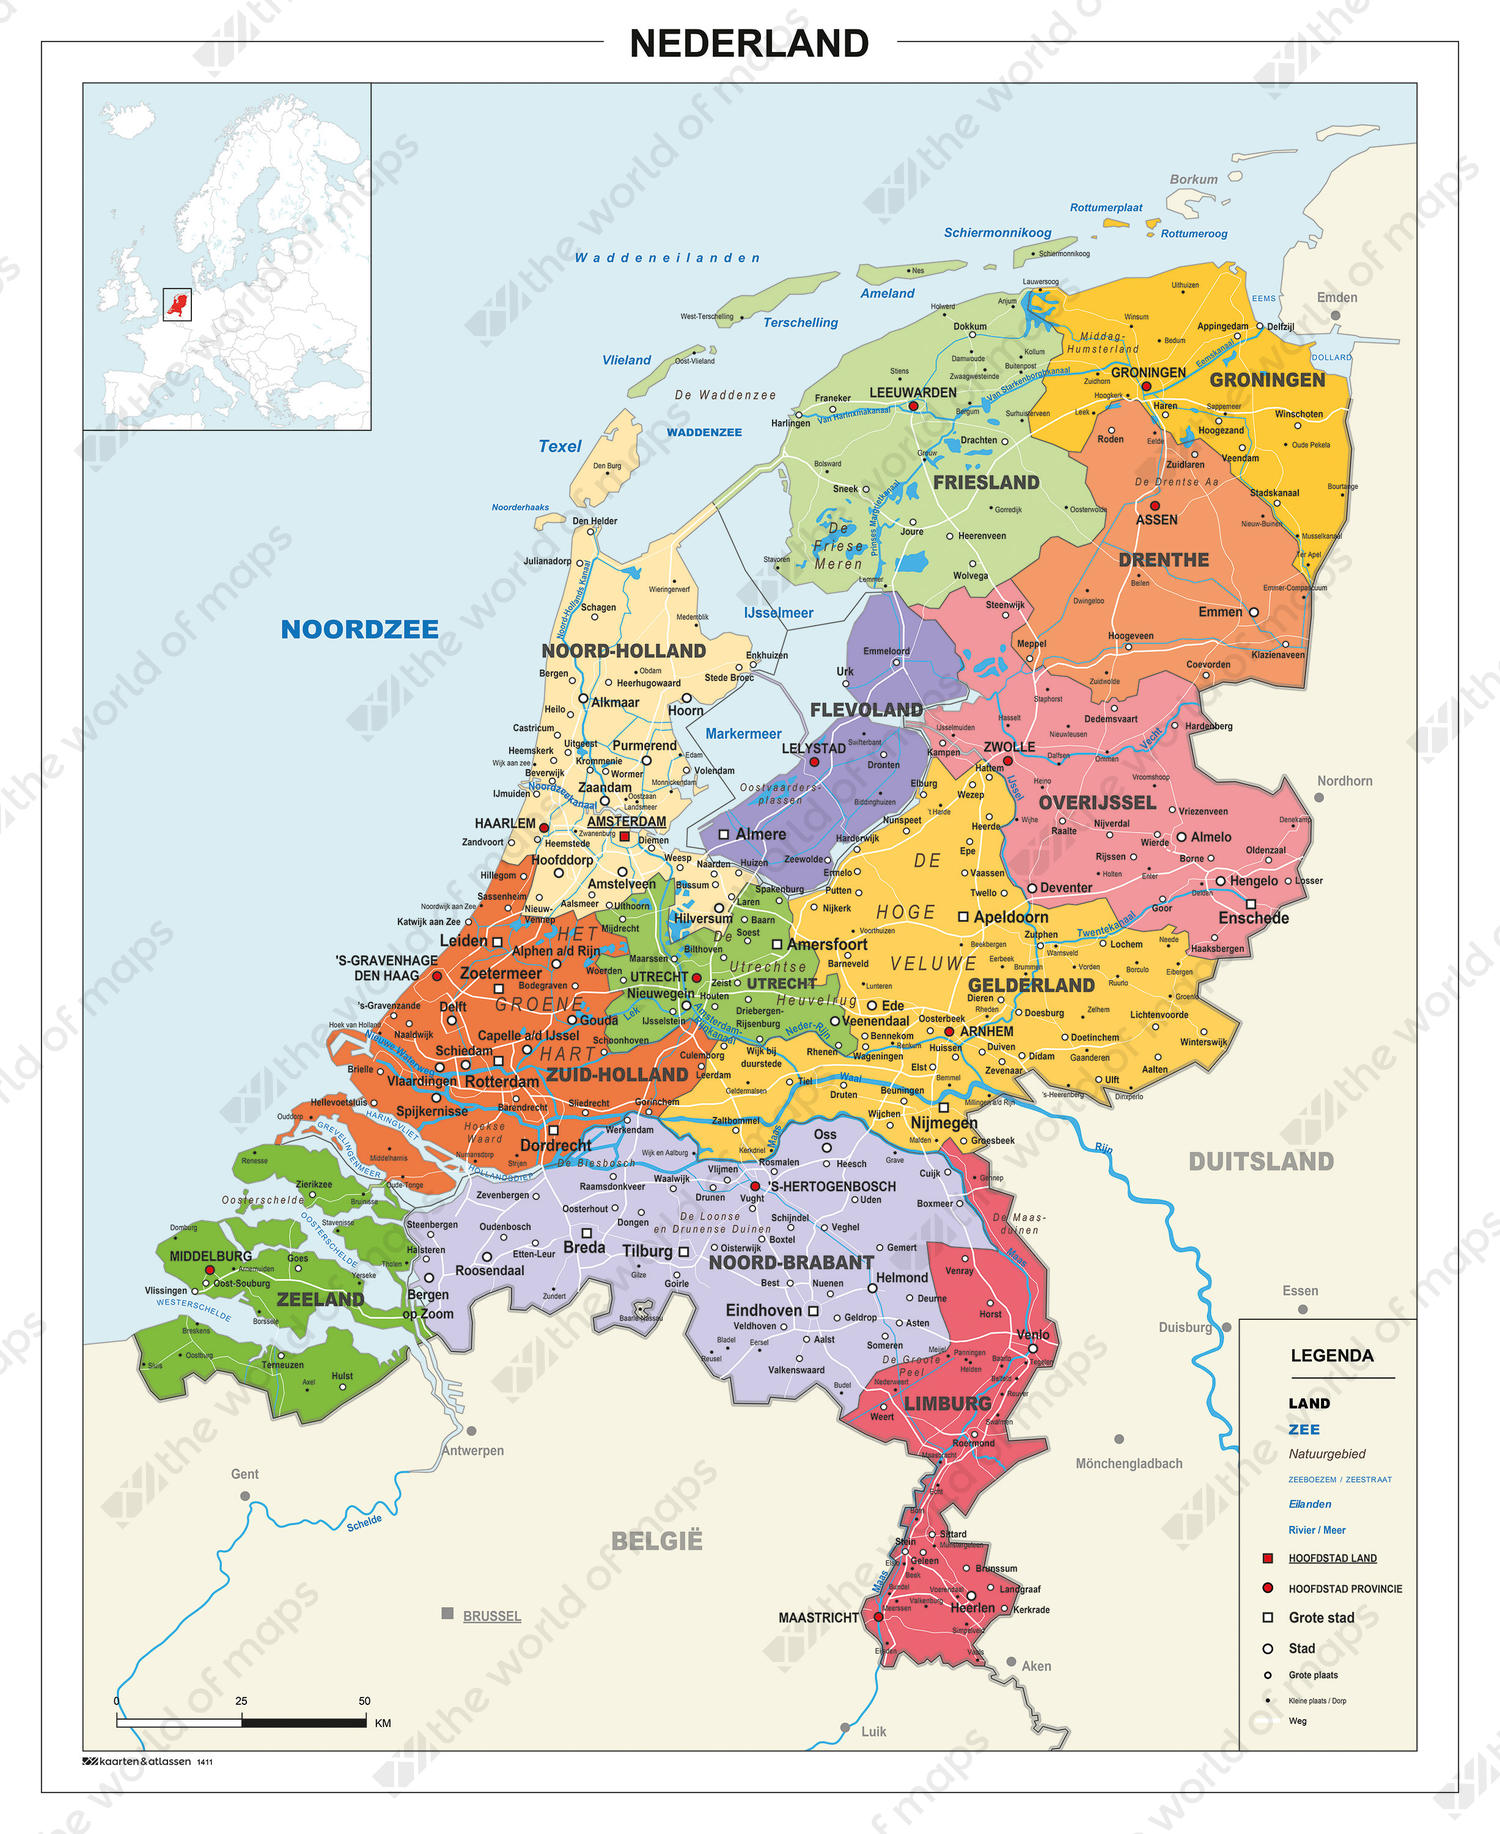 Digital Map of The Netherlands 1411 | The World of Maps.com